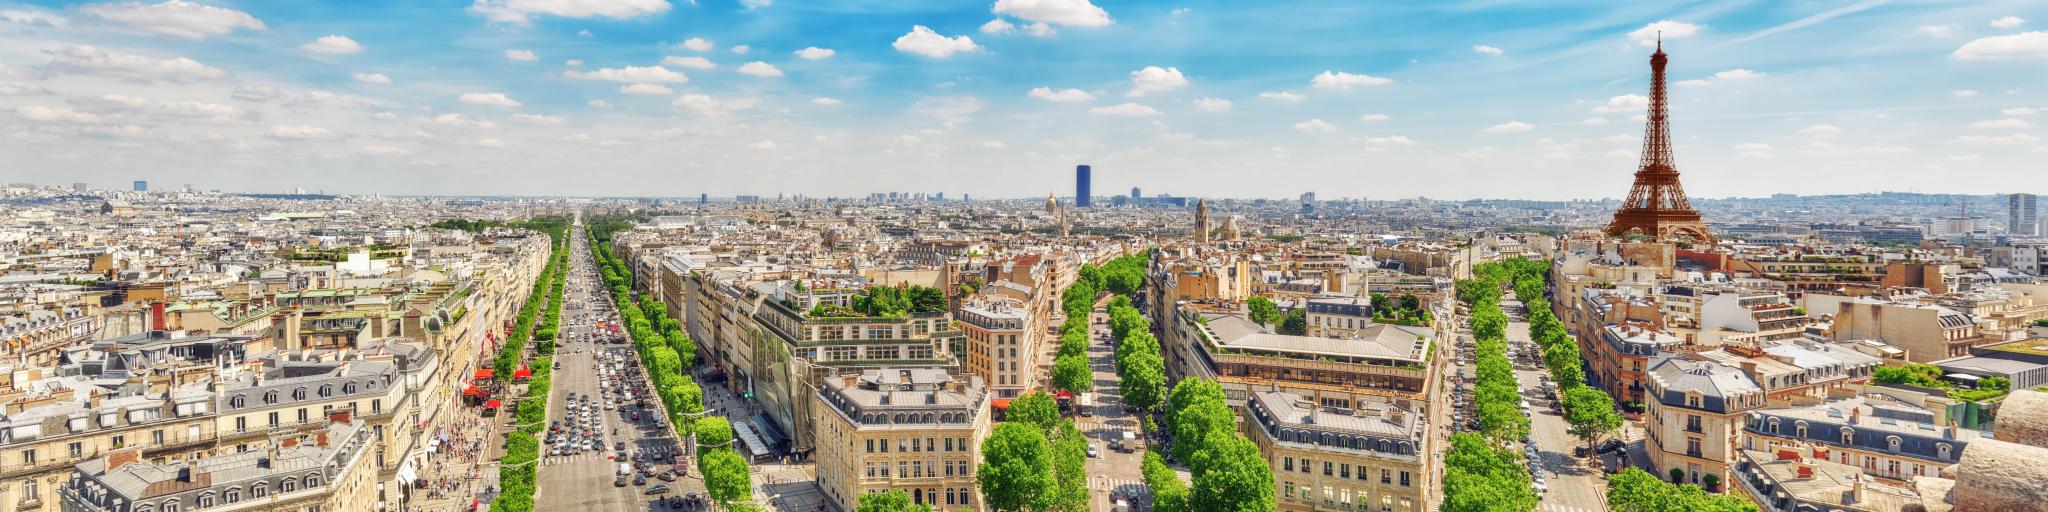 Beautiful panoramic view of Paris from the roof of the Triumphal Arch. Champs Elysees and the Eiffel Tower.